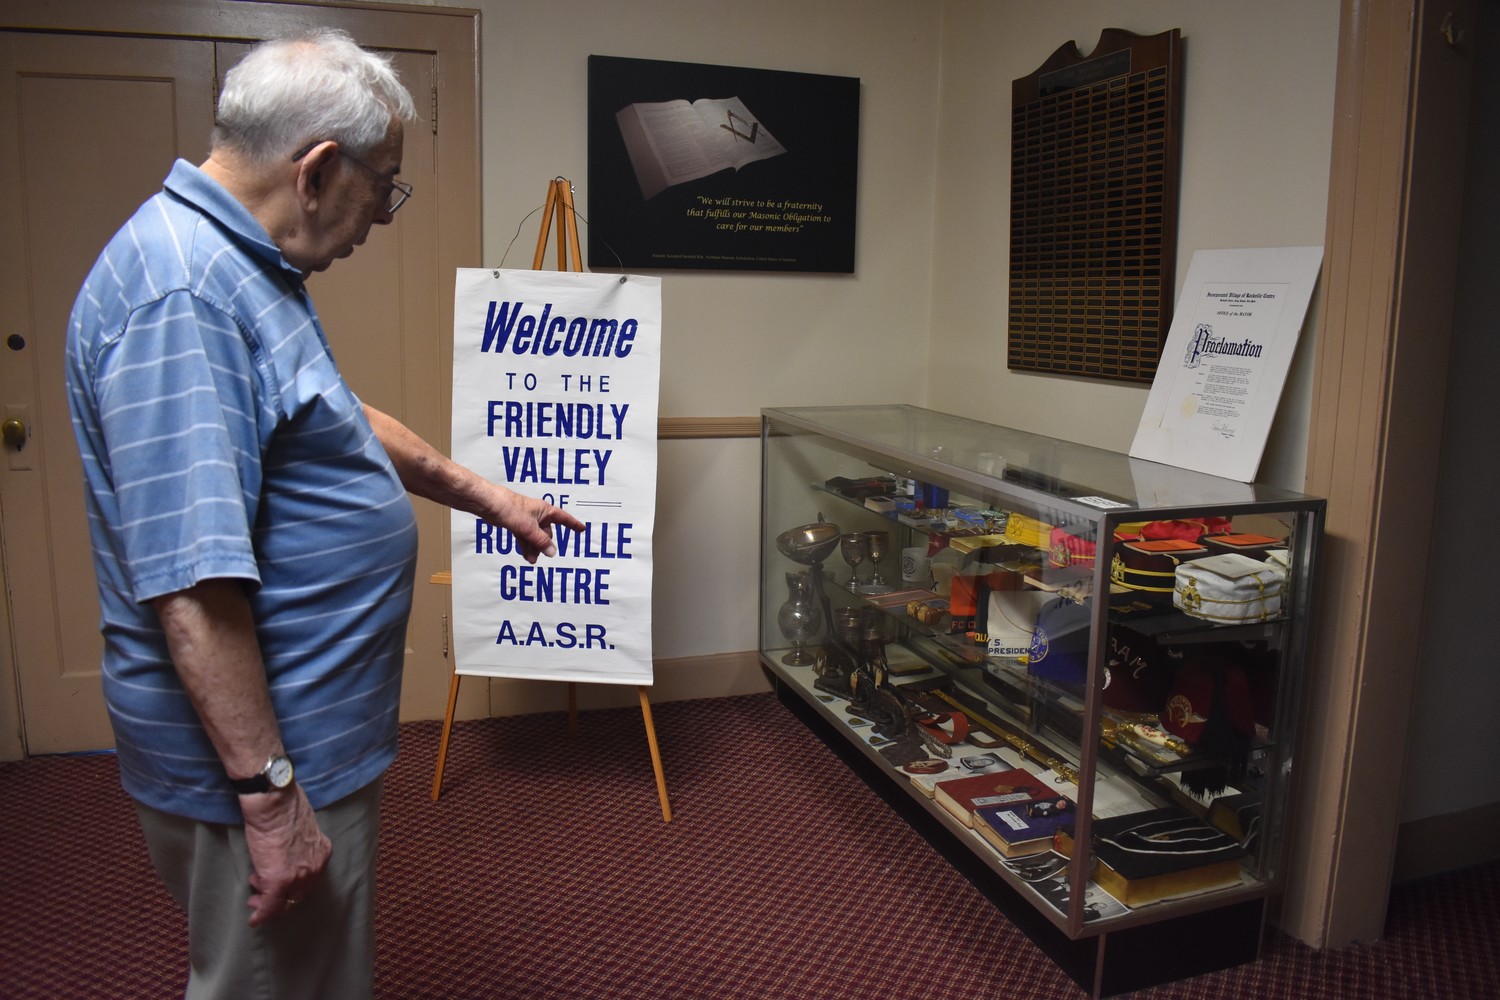 Bob Stack, a freemason for more than 50 years, showed off the display cases he recently filled to preserve the history of fellow members of freemasonry.